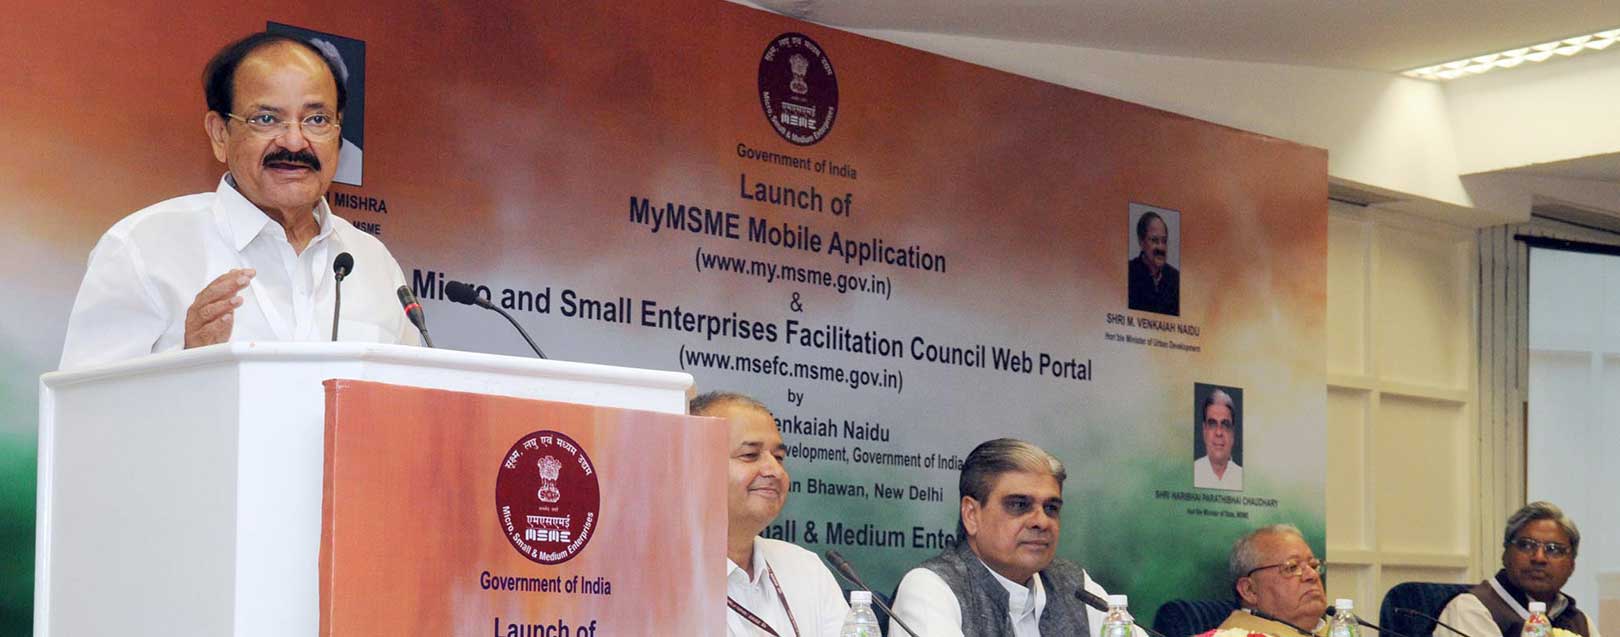 Naidu launches MSEFC portal and MyMSME app, for MSME sector